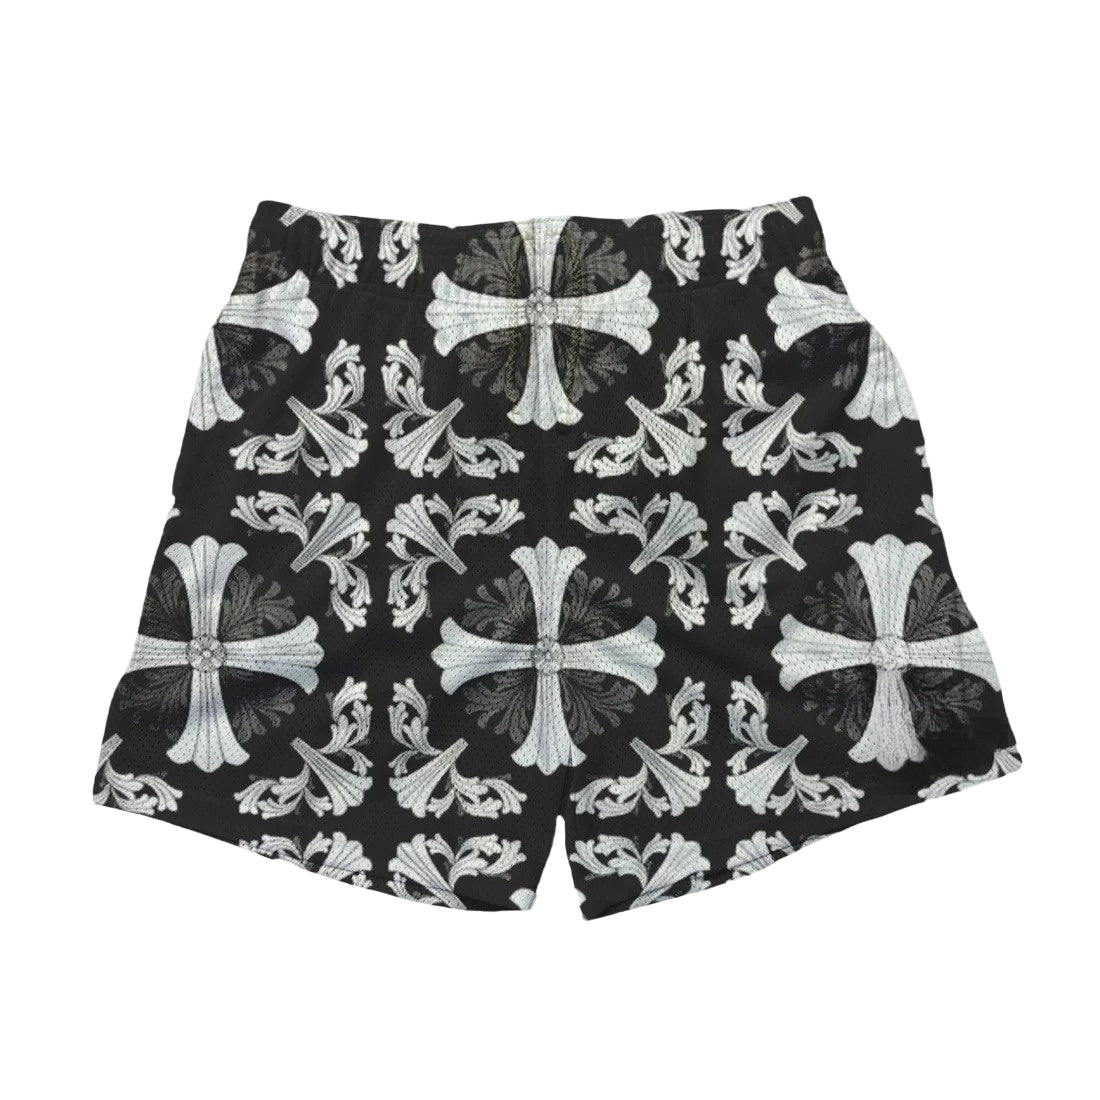 a black and white shorts with white crosses on it